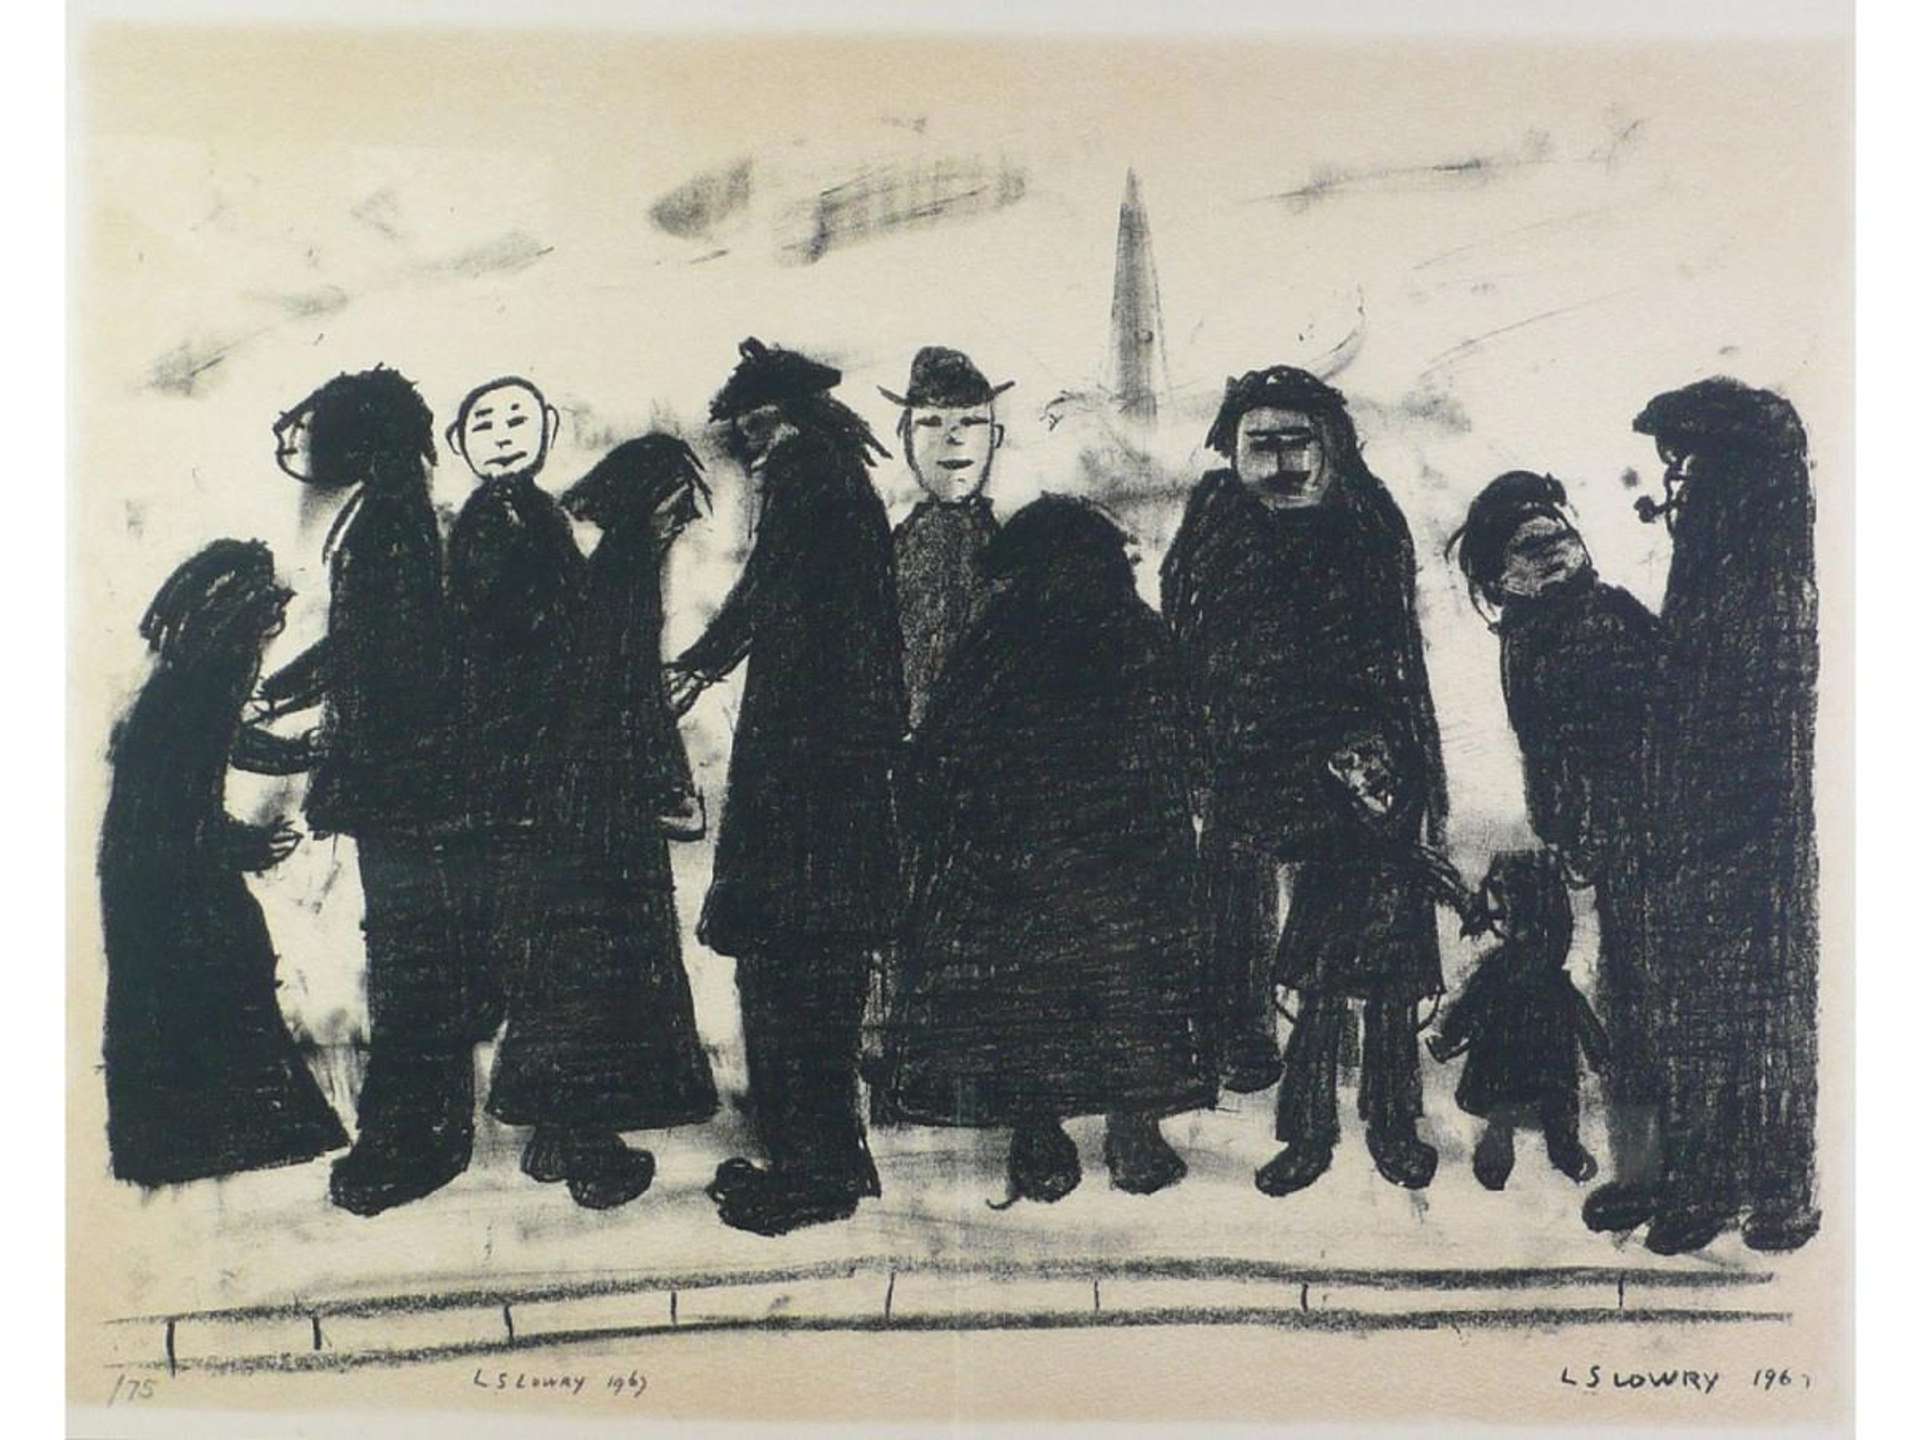 Shapes And Sizes - Signed Print by L S Lowry 1967 - MyArtBroker